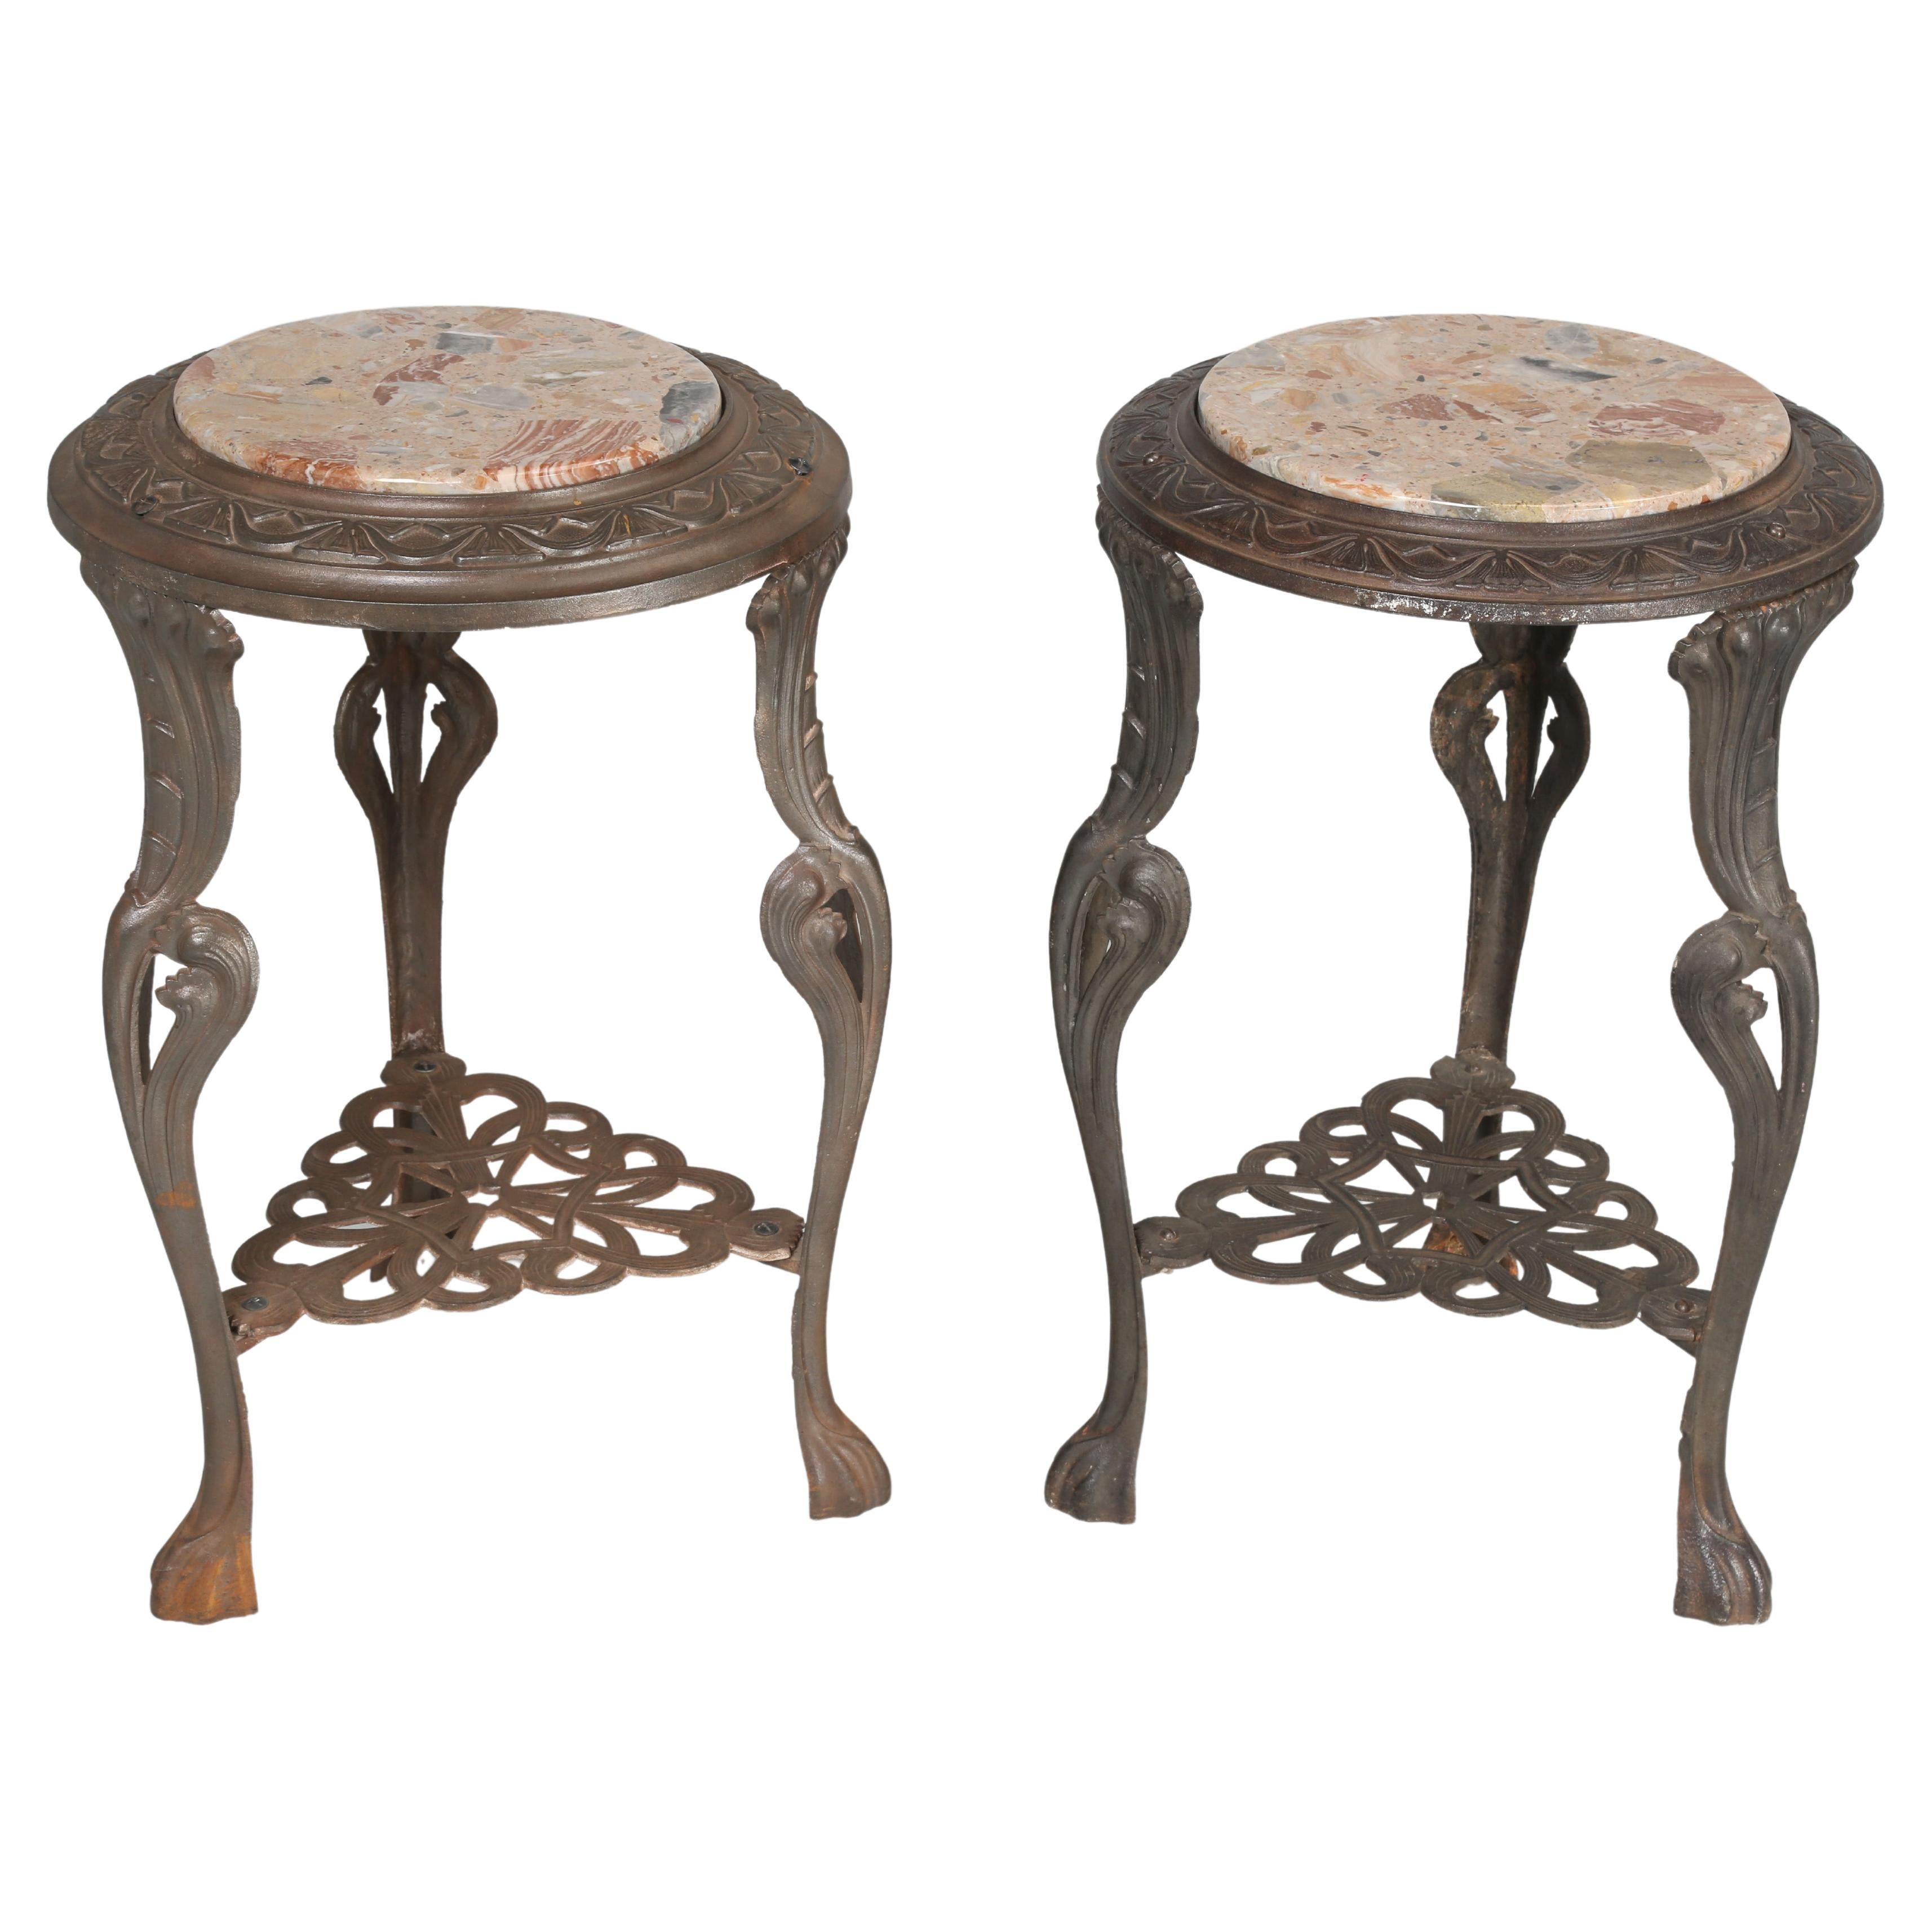 Near Pair of French Art Nouveau Guéridon Cast Iron Tables with Stone Tops For Sale